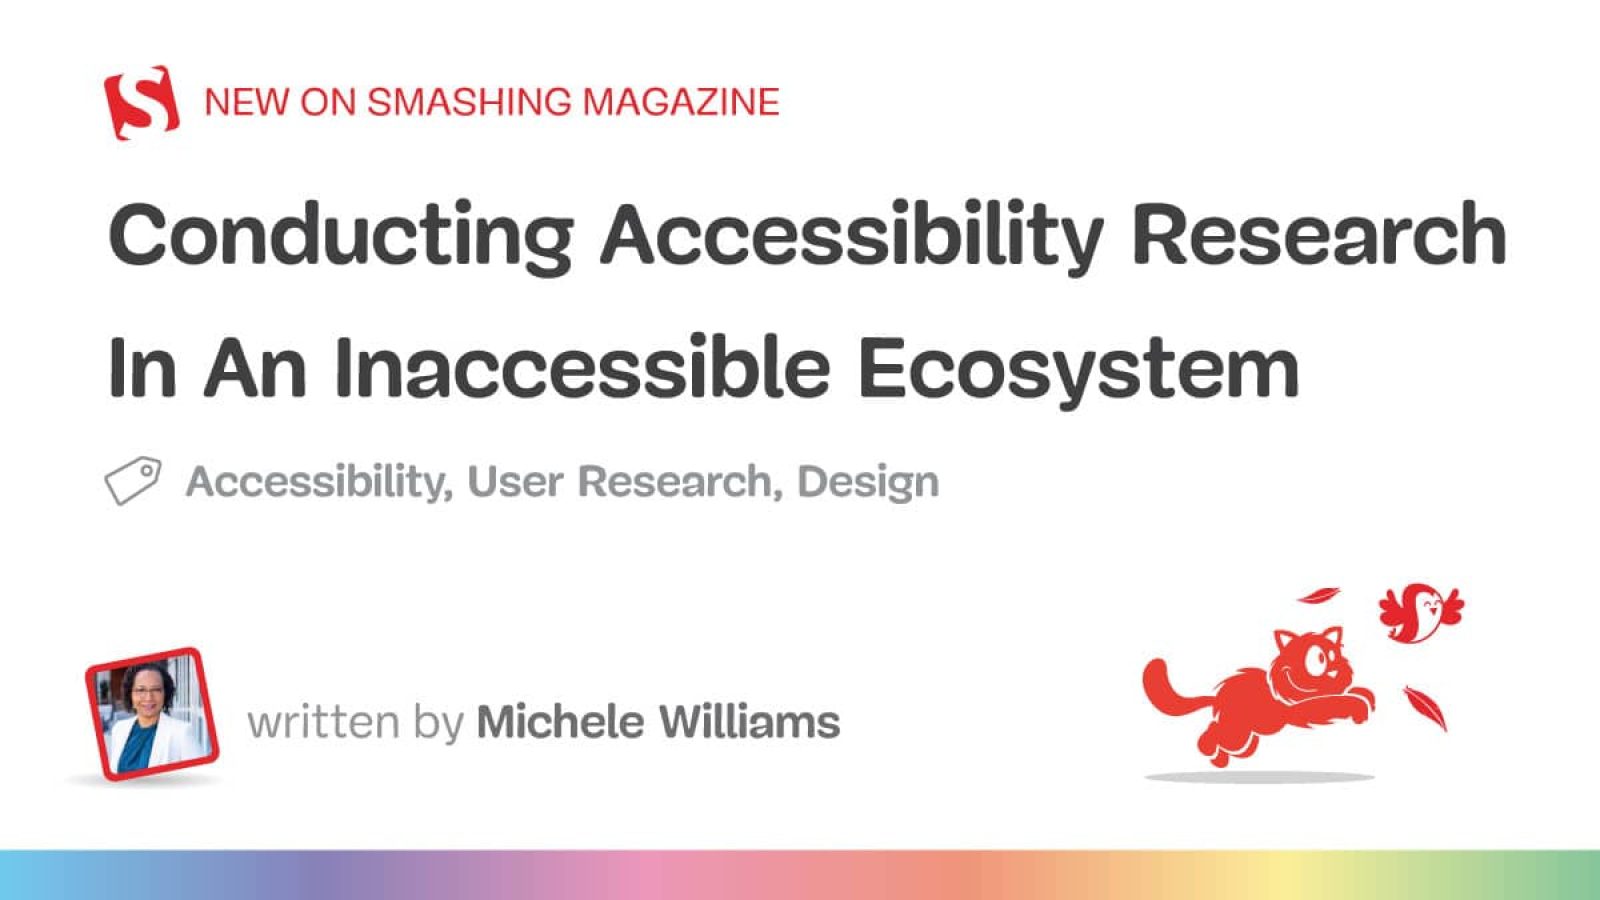 Conducting Accessibility Analysis In An Inaccessible Ecosystem